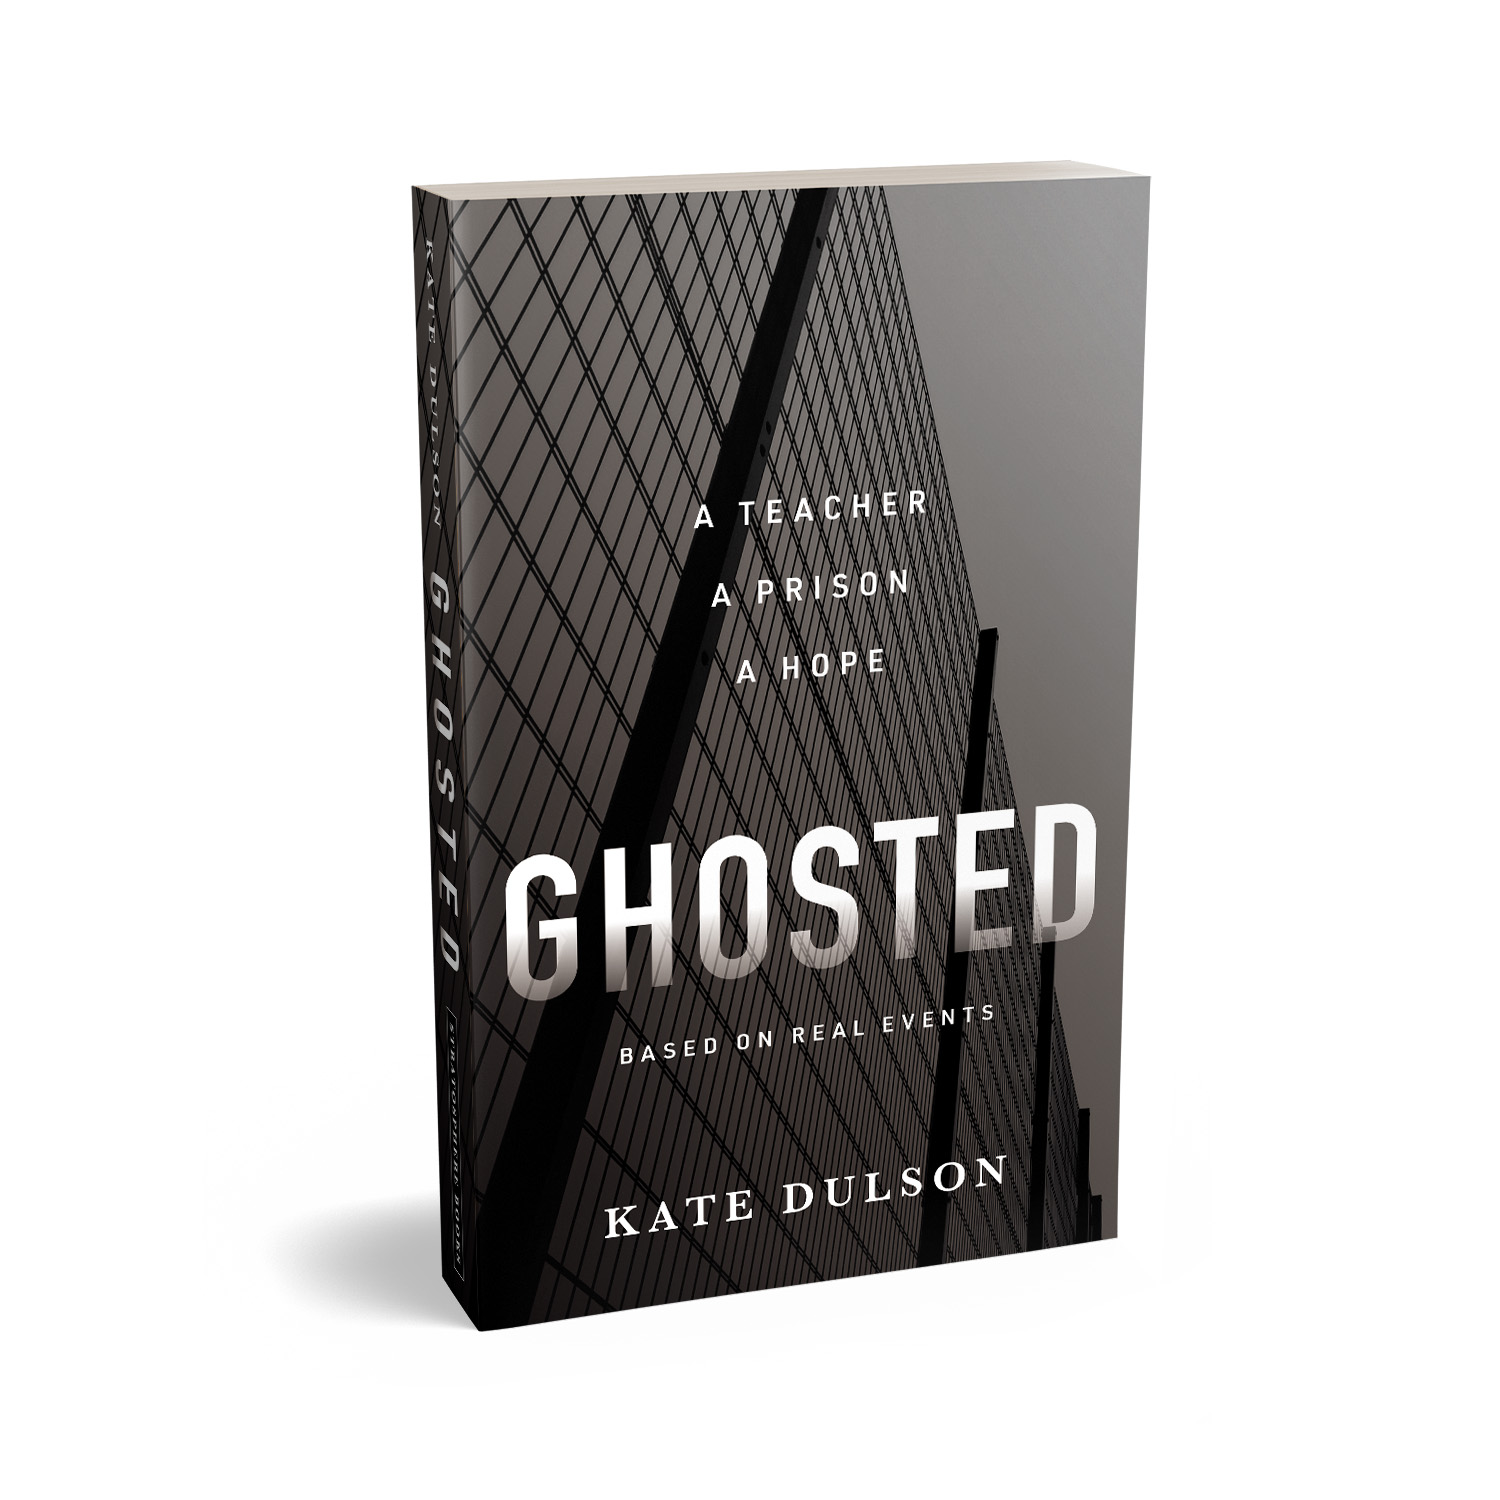 'Ghosted' is a gripping prison-based fiction novel. The author is Kate Dulson. The book cover and interior design are by Mark Thomas. To learn more about what Mark could do for your book, please visit coverness.com.